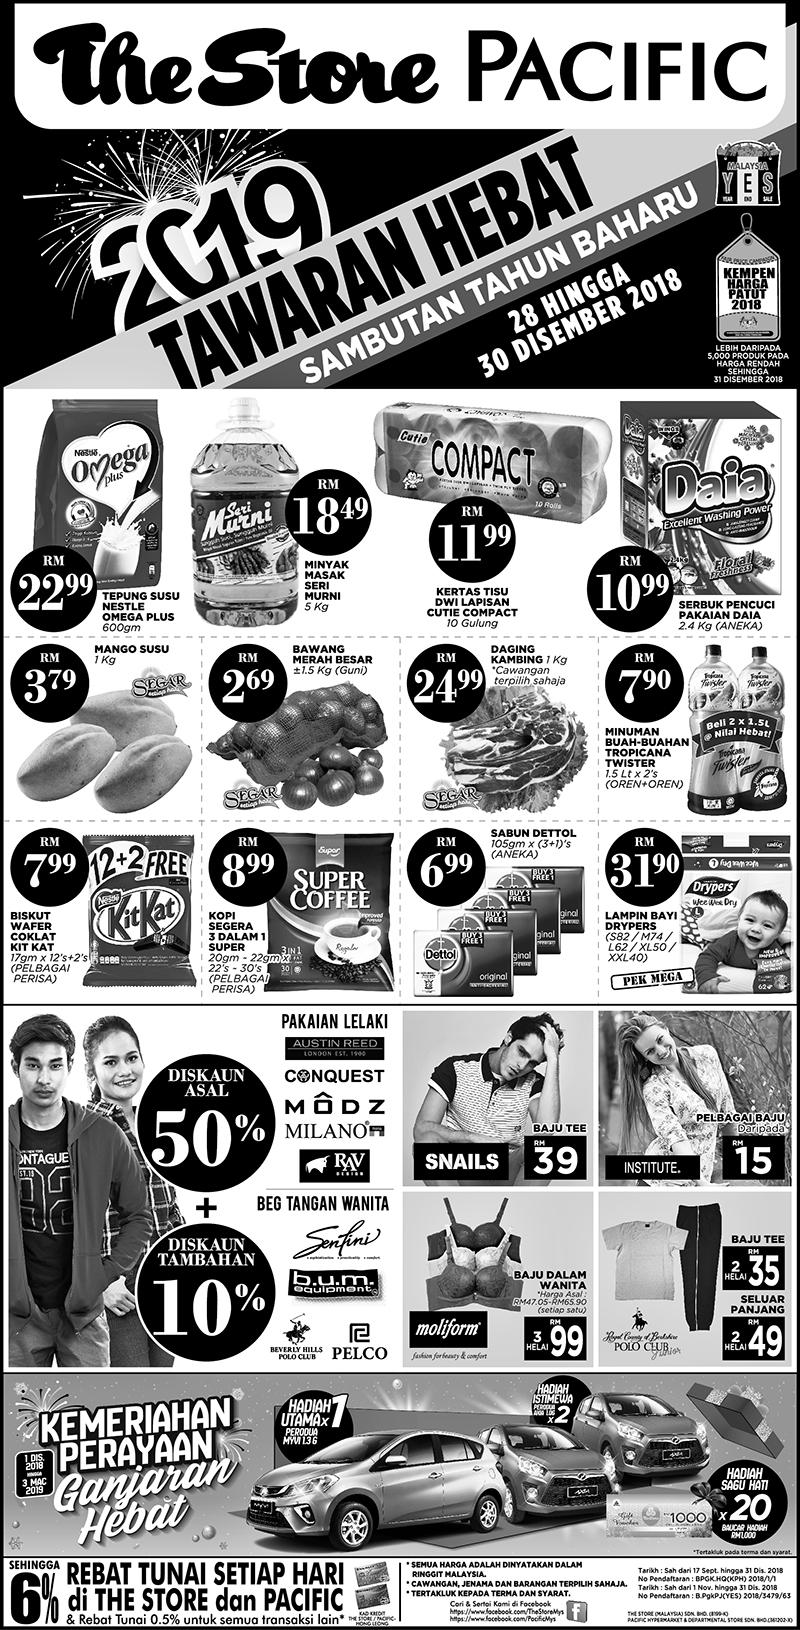 The Store and Pacific Hypermarket New Year Promotion (28 December 2018 - 30 December 2018)